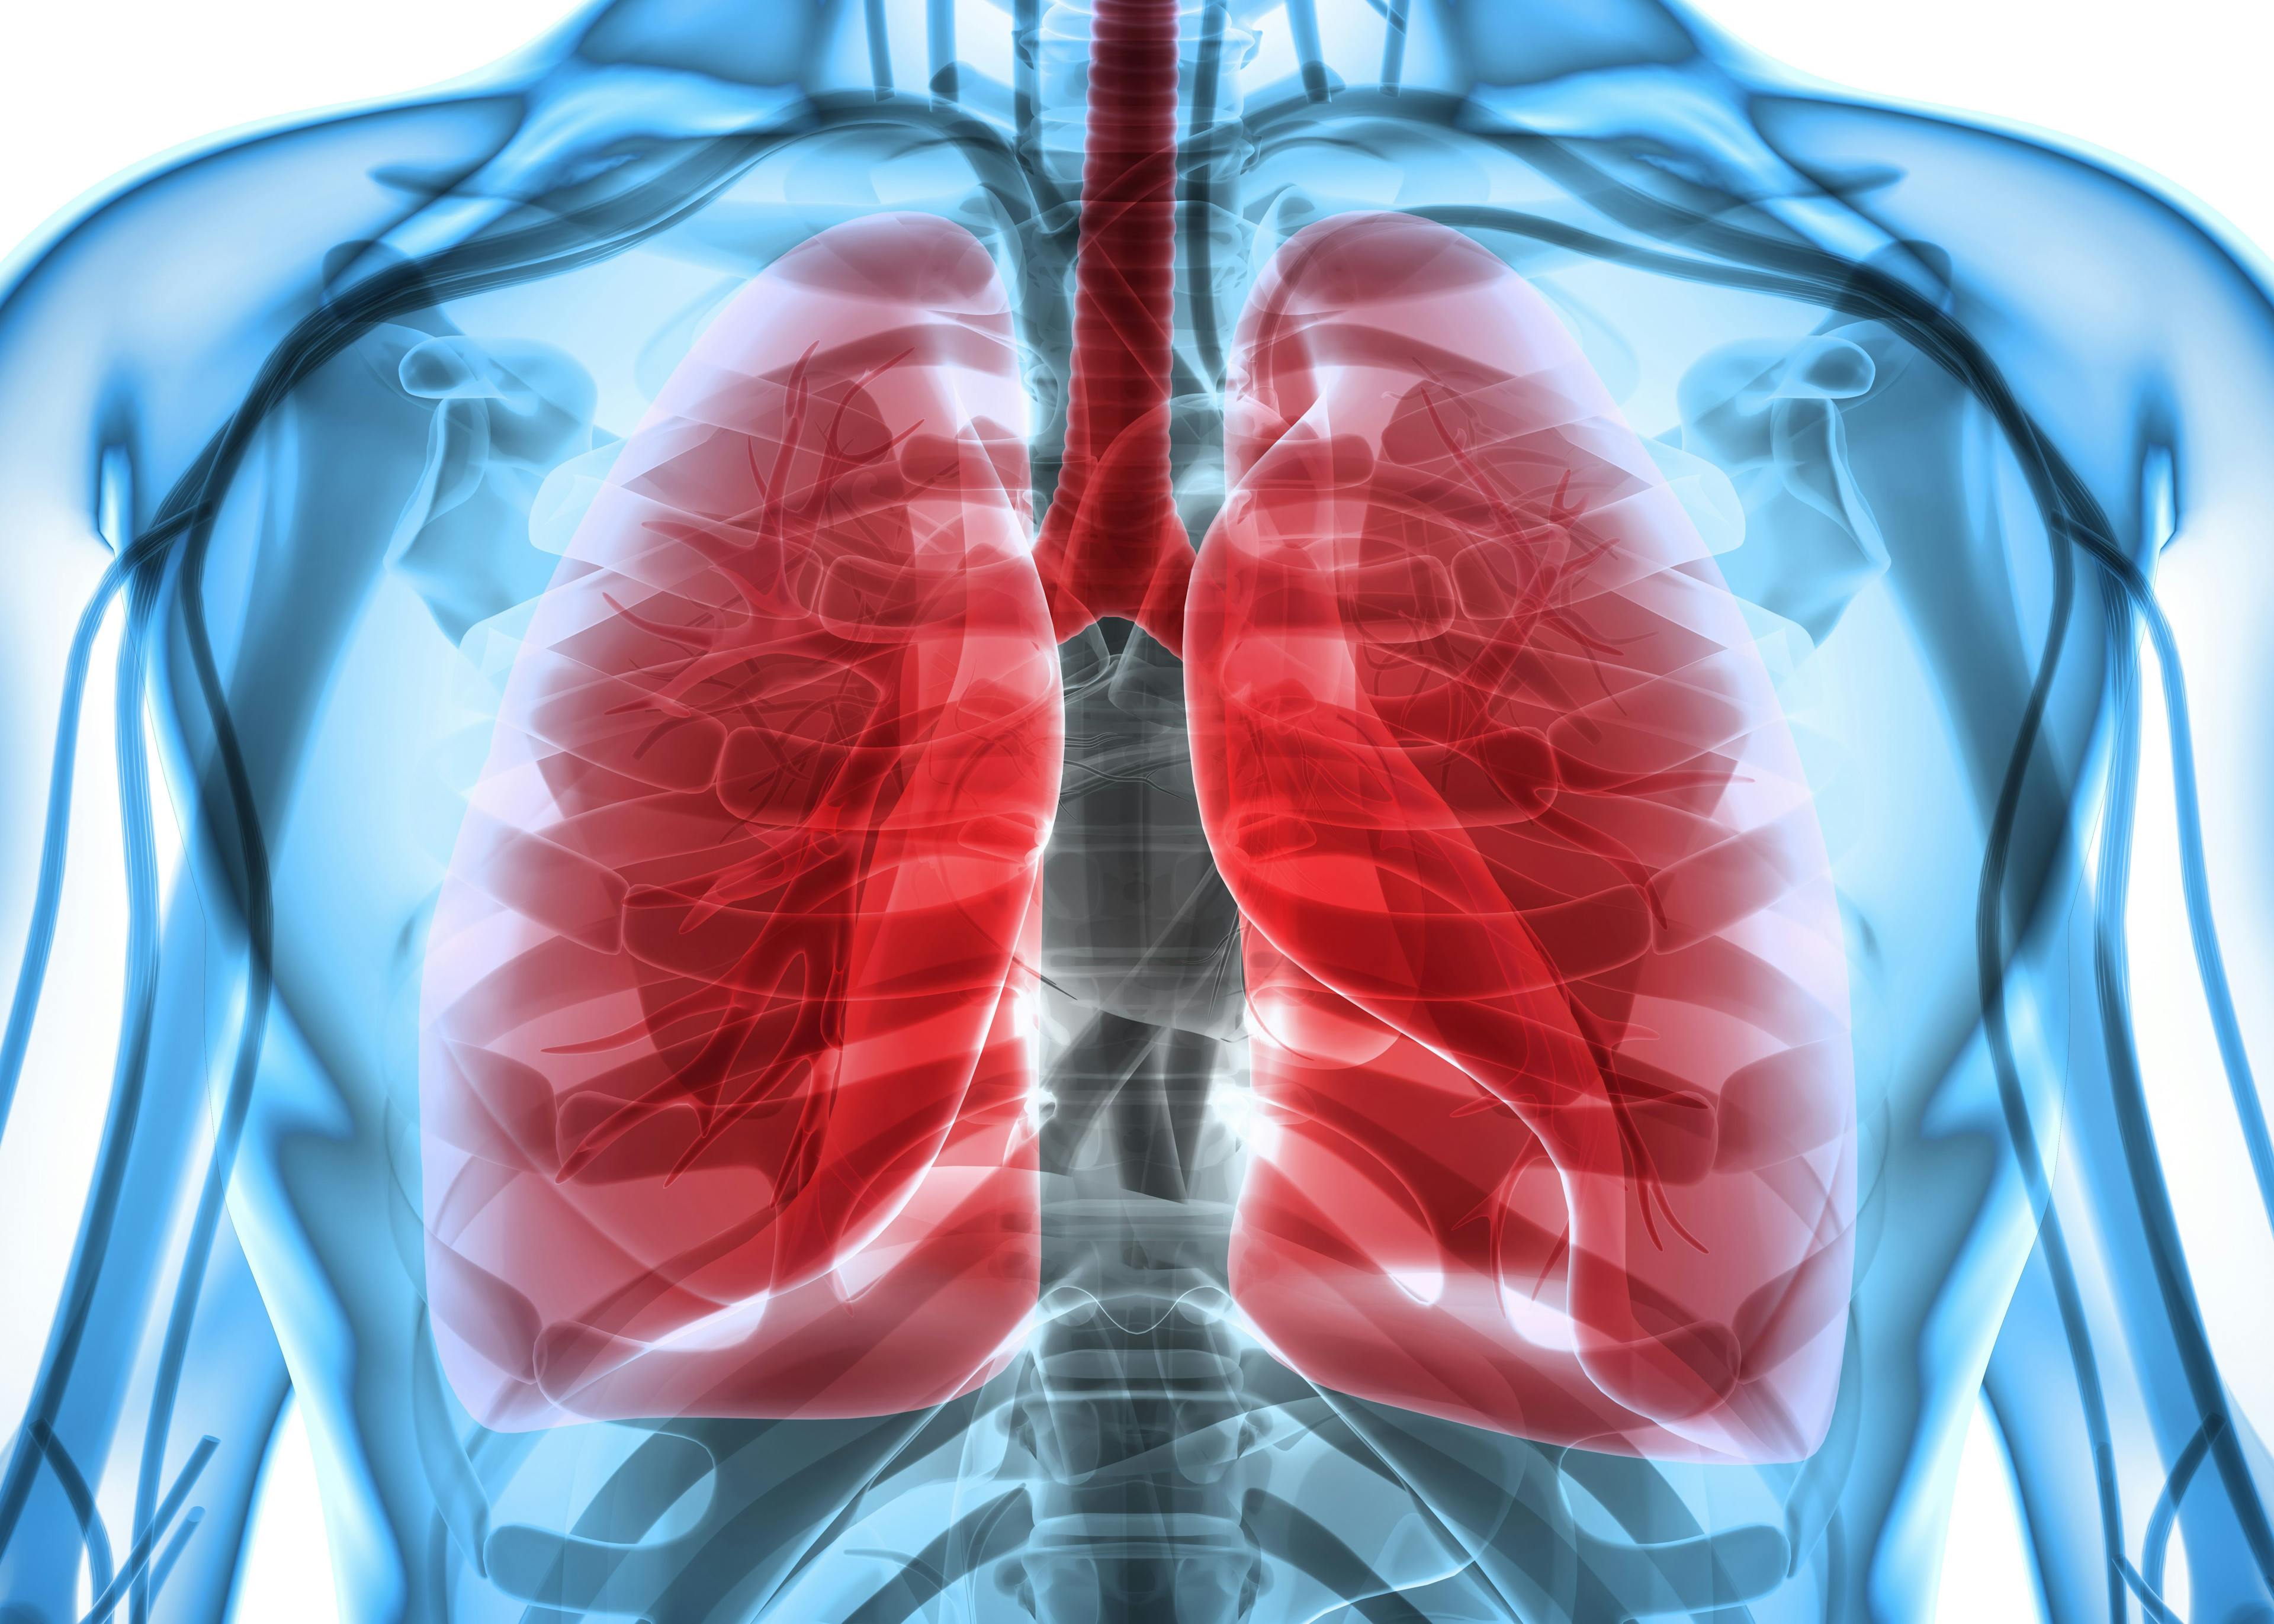 Adjuvant Pembrolizumab Yields Impressive Disease-Free Survival Outcomes in Select Patients With NSCLC